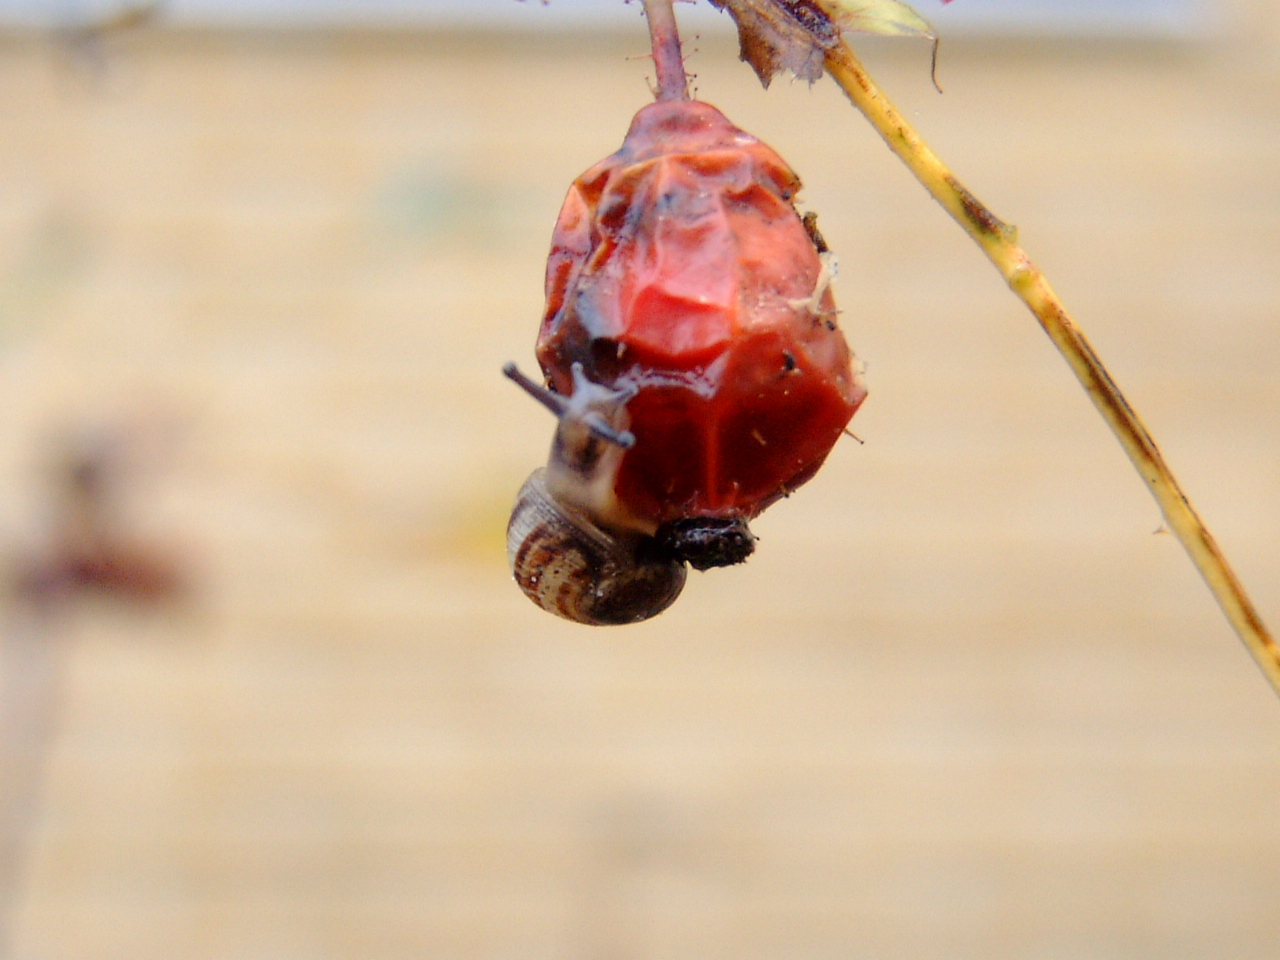 snail on poor excuse for a berry maartent royalty